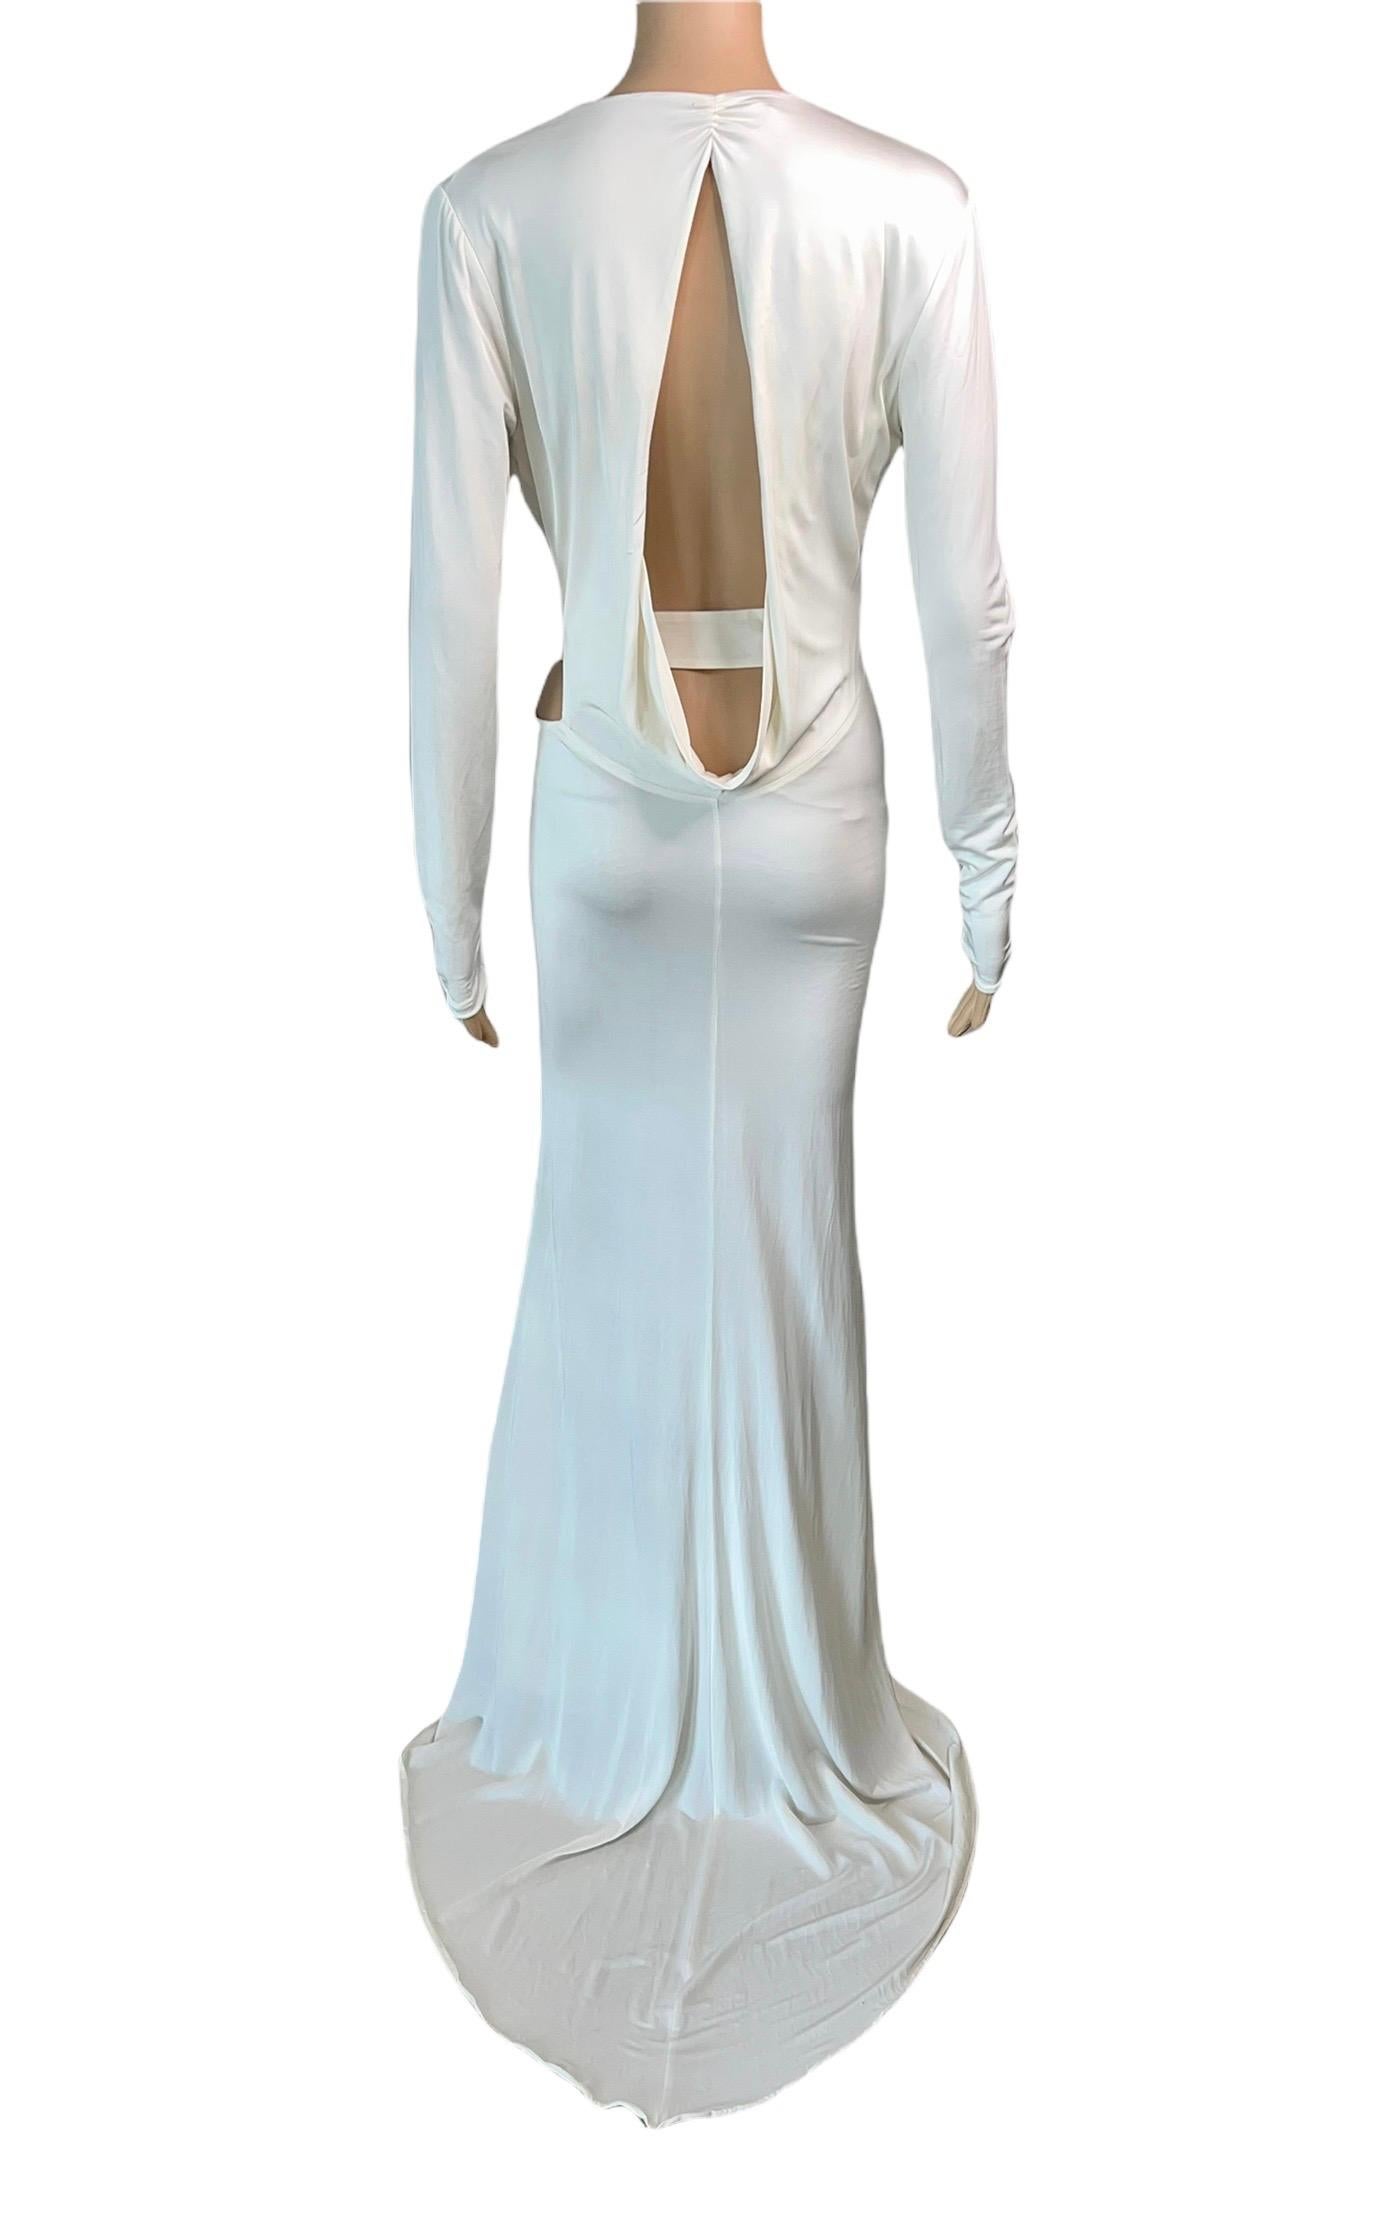 Gray Tom Ford for Gucci F/W 2004 Runway Plunging Cutout Ivory Evening Dress Gown